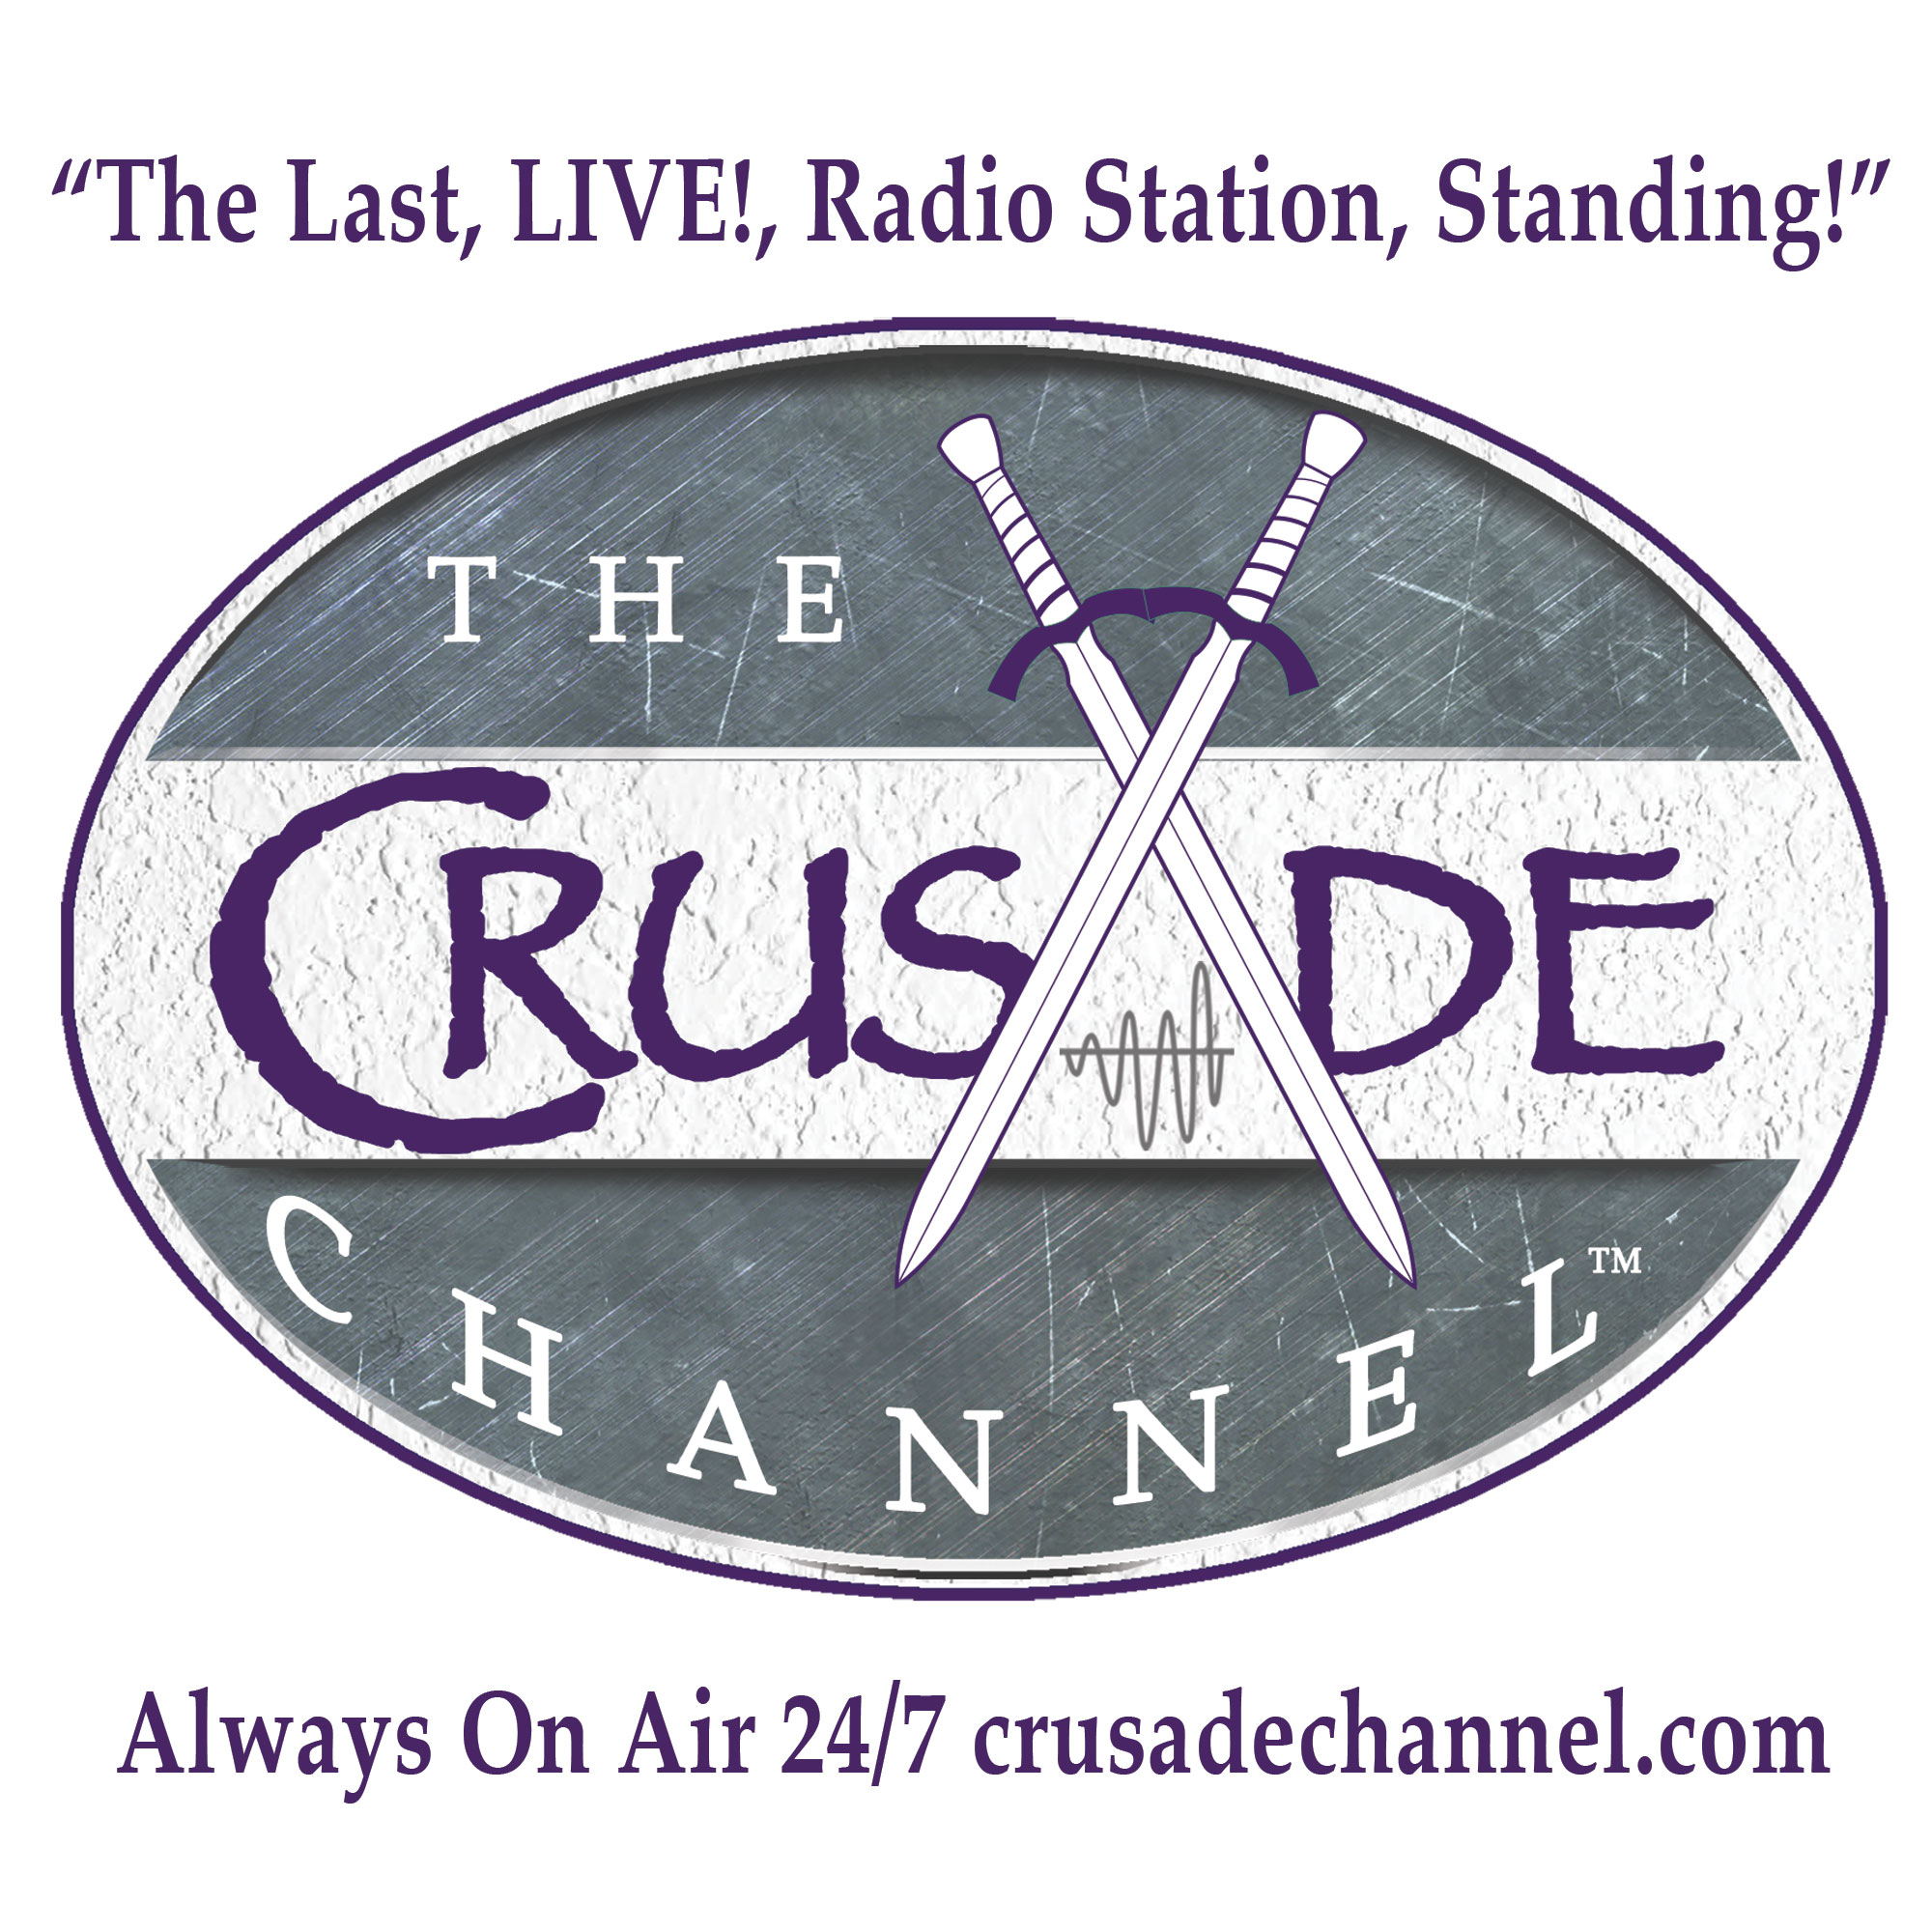 CRUSADE Channel Previews